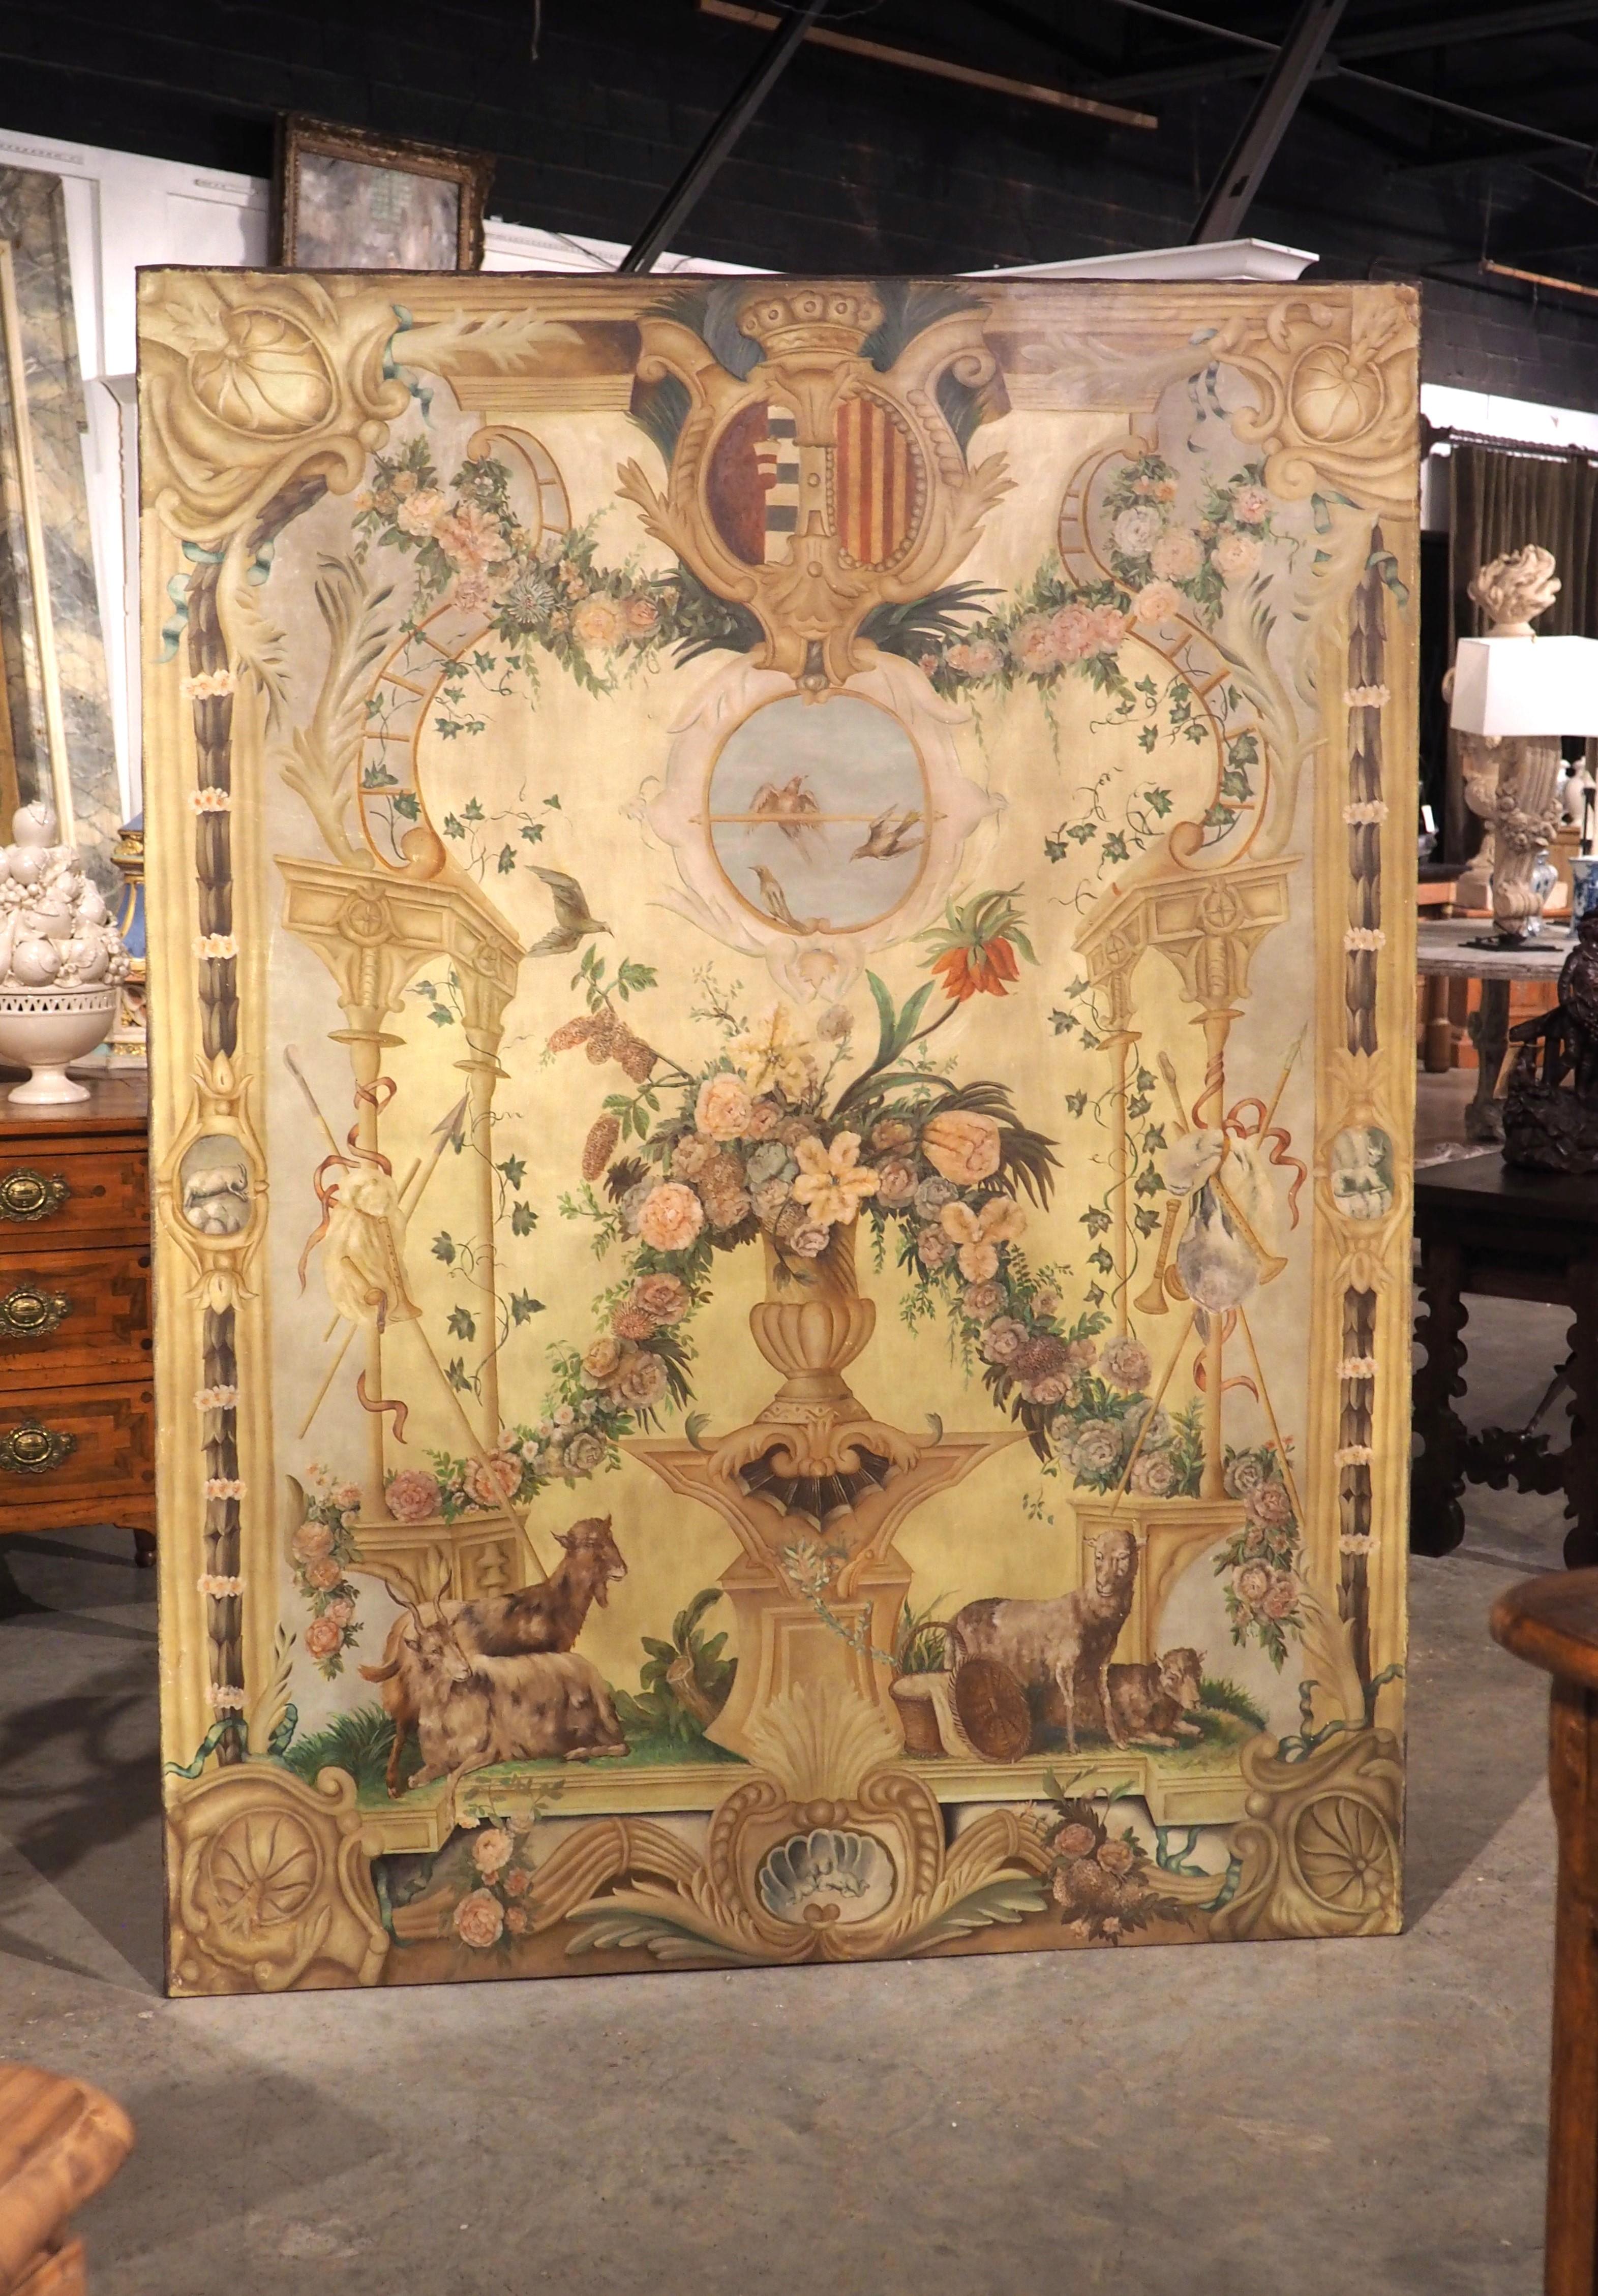 Recently purchased from a home in Perpignan, France, this toile peinte with a double coat of arms is not only a beautiful painting representing the arrival of Spring, but also a piece of history involving French royalty. Painted by an unknown French